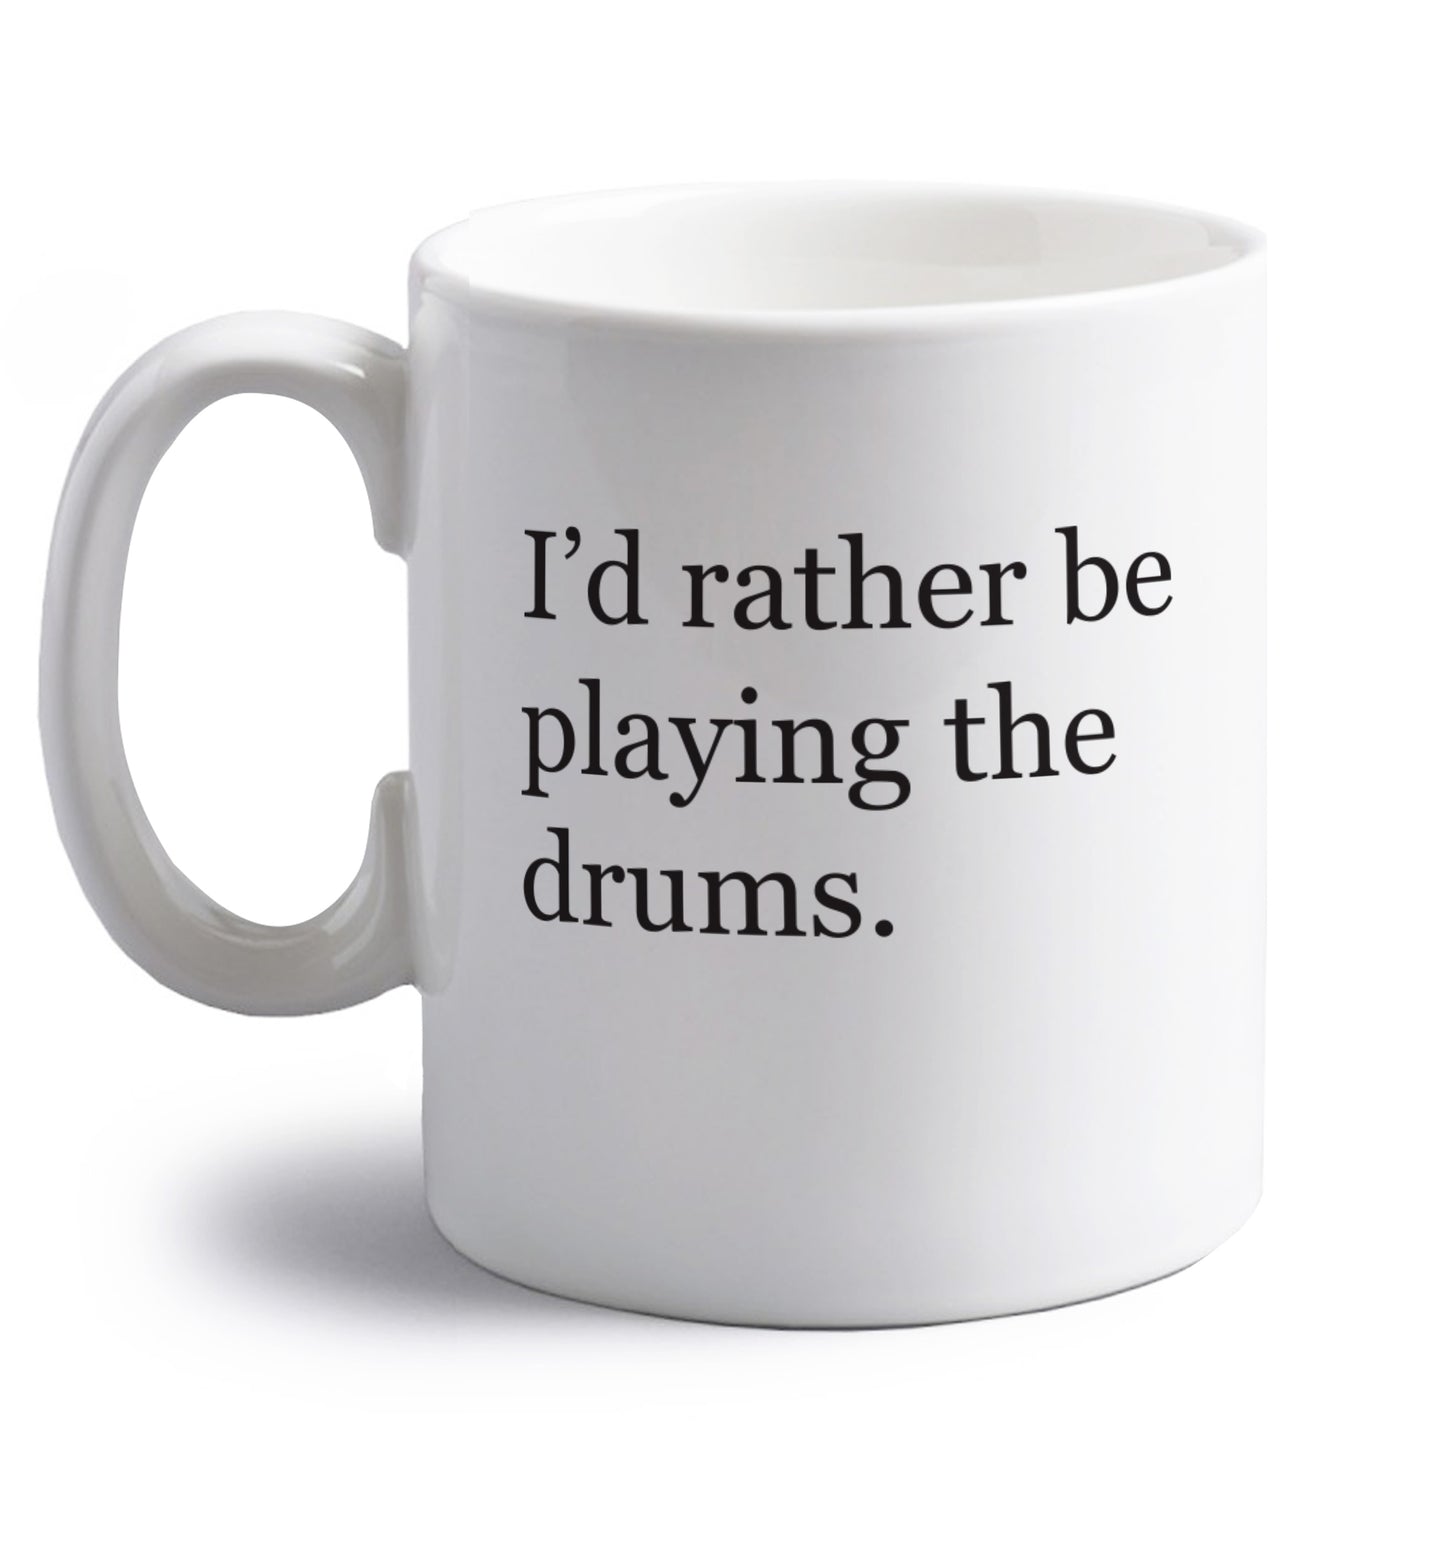 I'd rather be playing the drums right handed white ceramic mug 